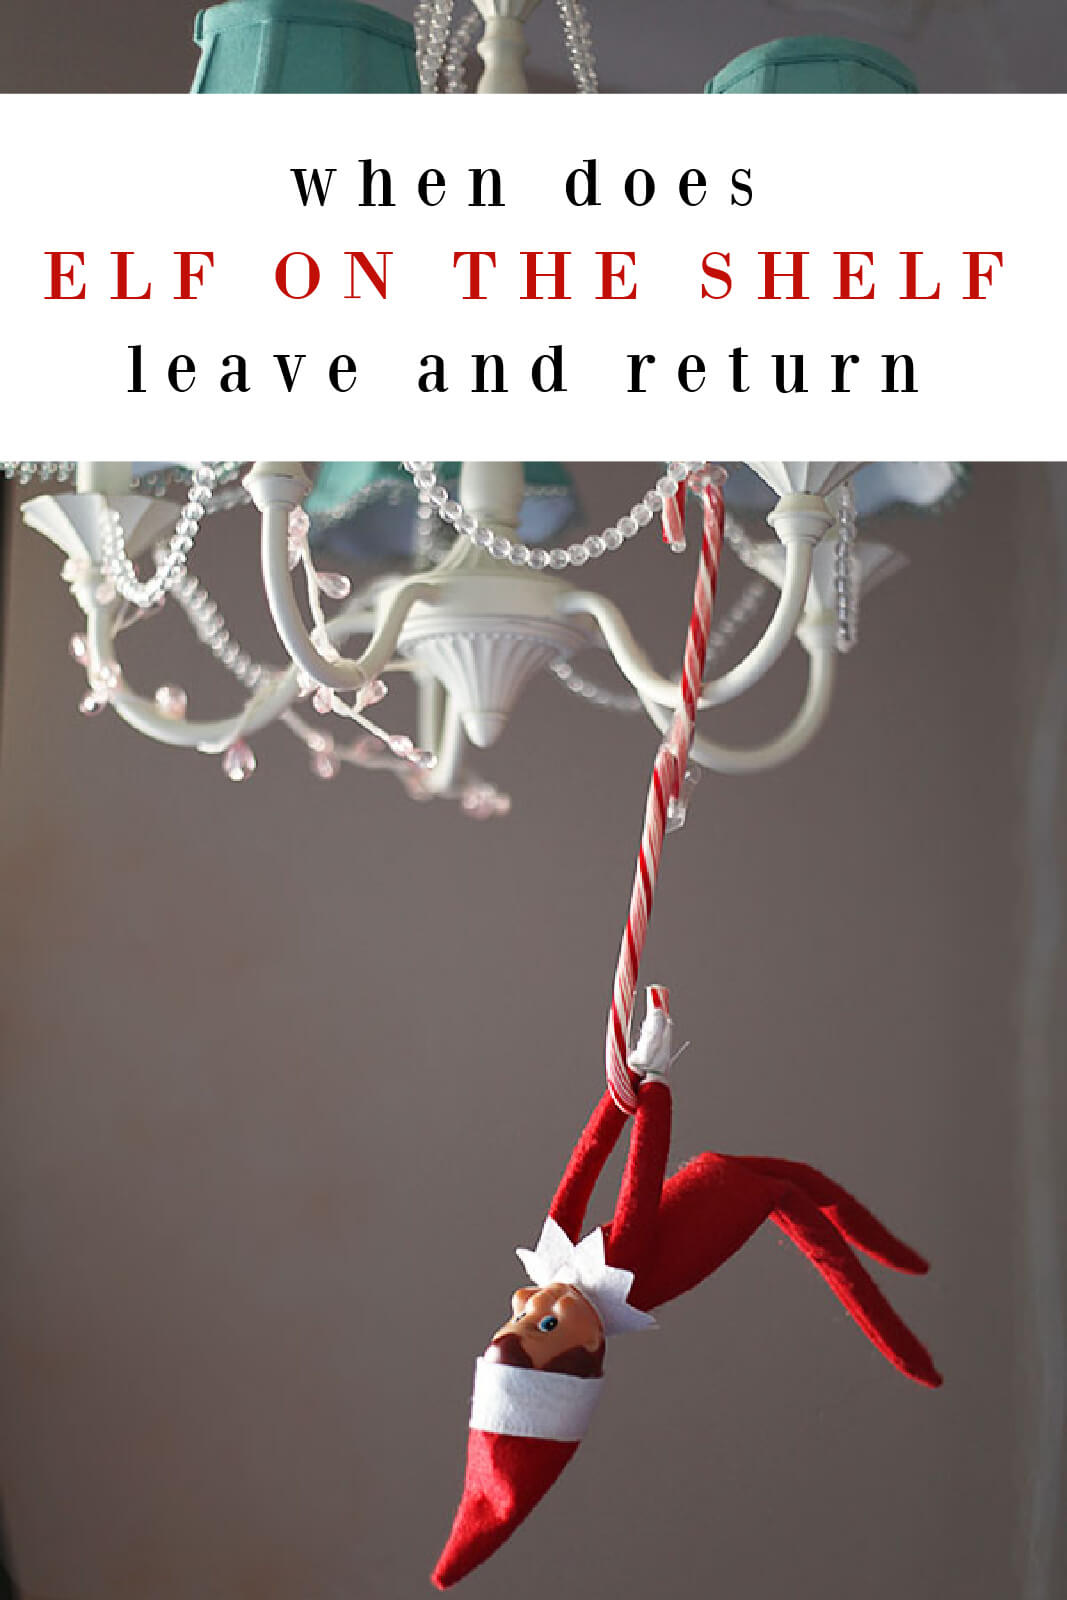 An Elf on the Shelf hangs from a chandelier by candy canes. Text overlay reads "when does elf on the shelf leave and return"